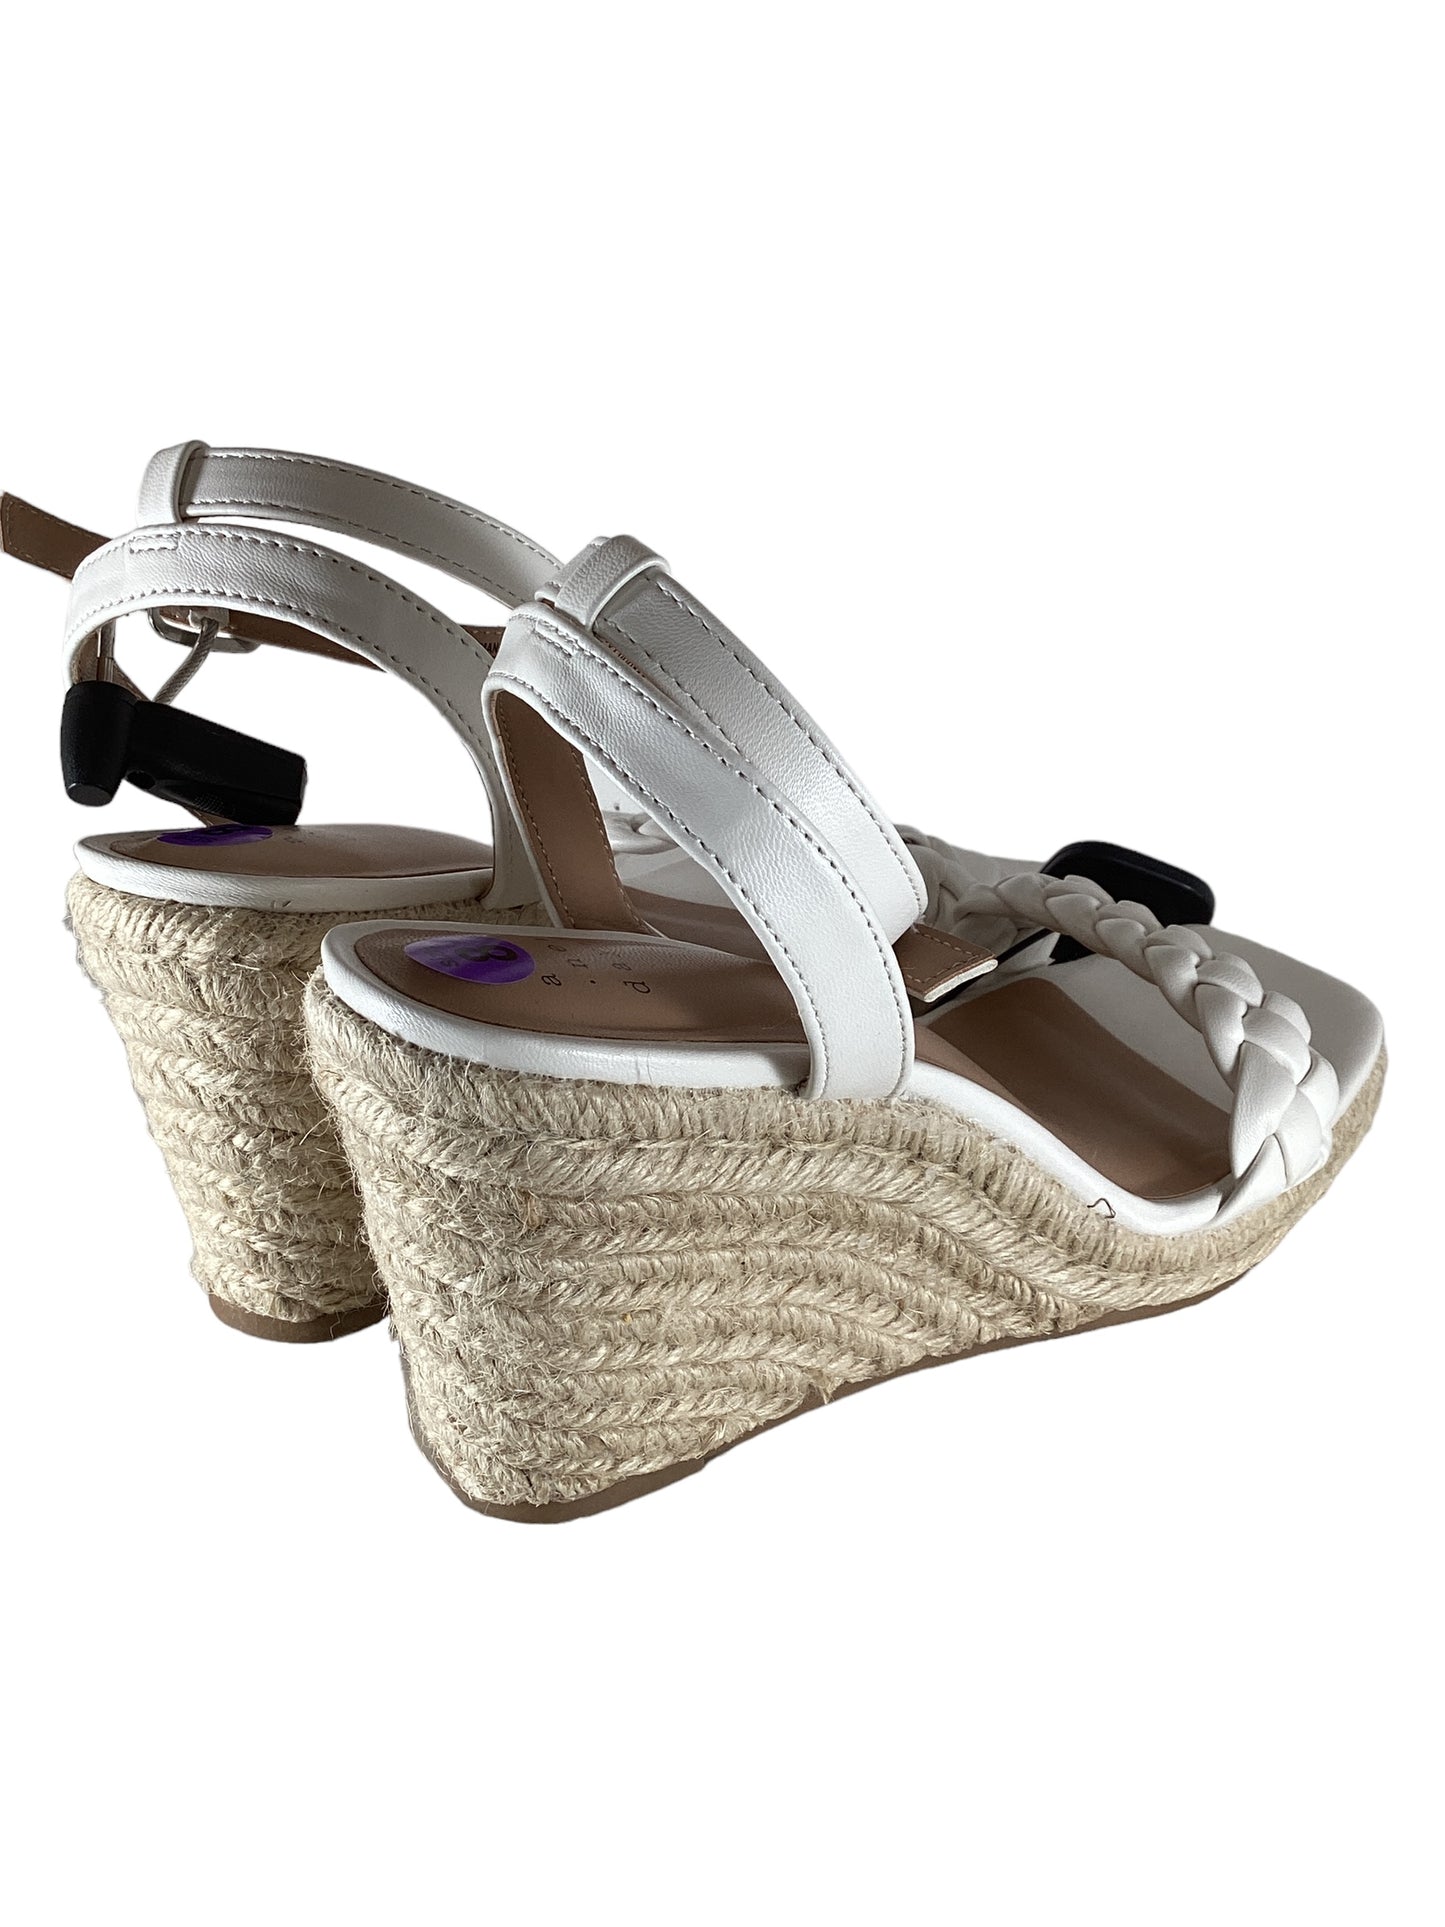 Sandals Heels Wedge By A New Day  Size: 8